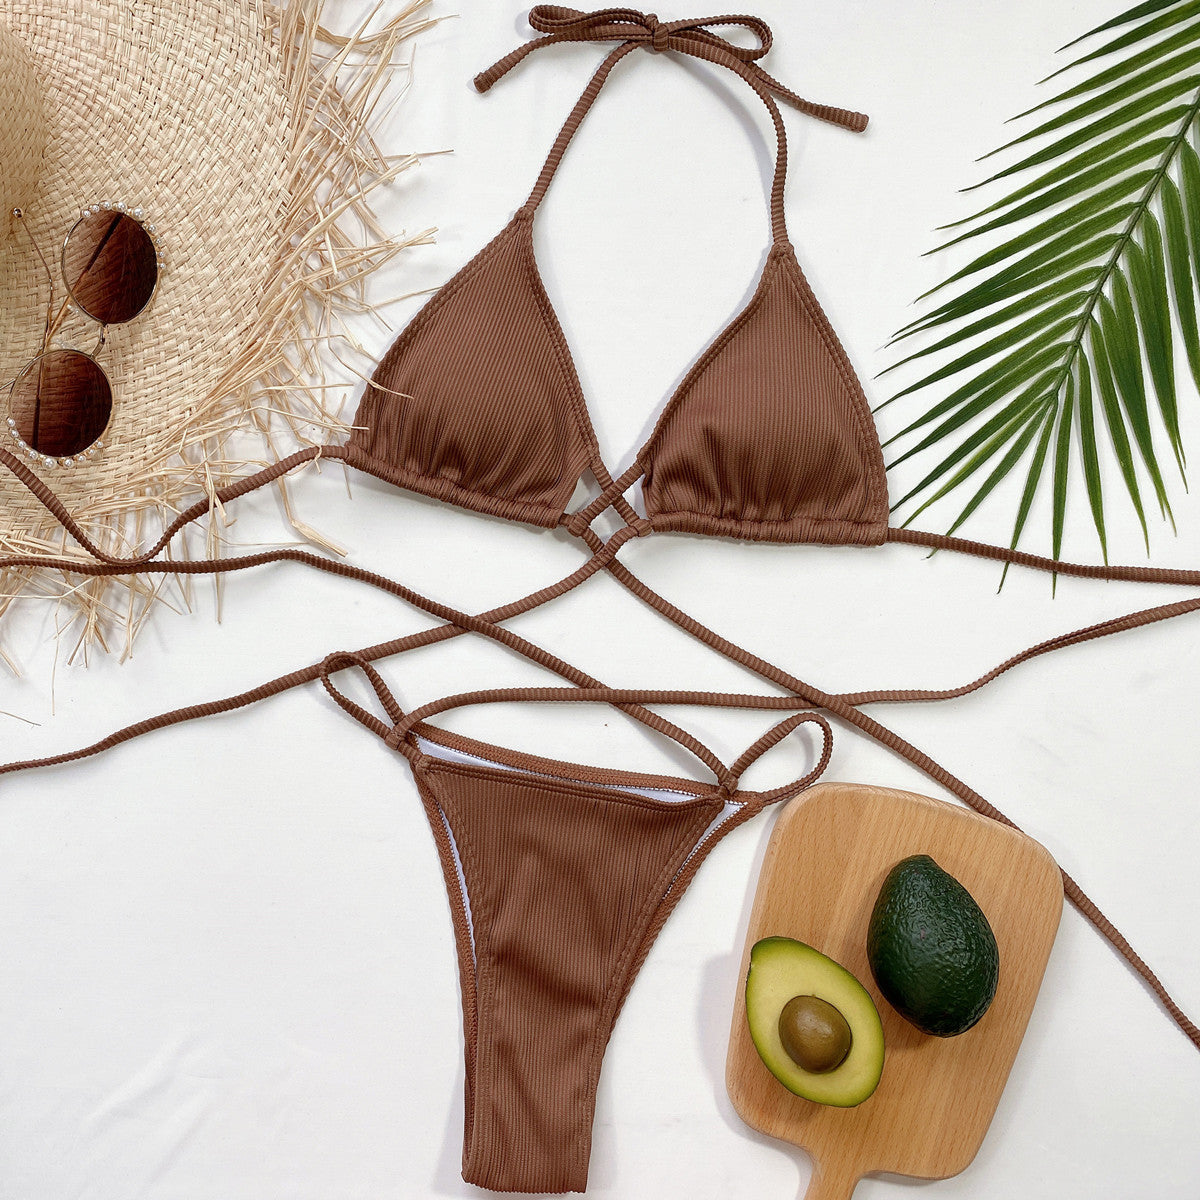 Get ready for the beach with our stunning bikini set, designed for ultimate style and comfort.